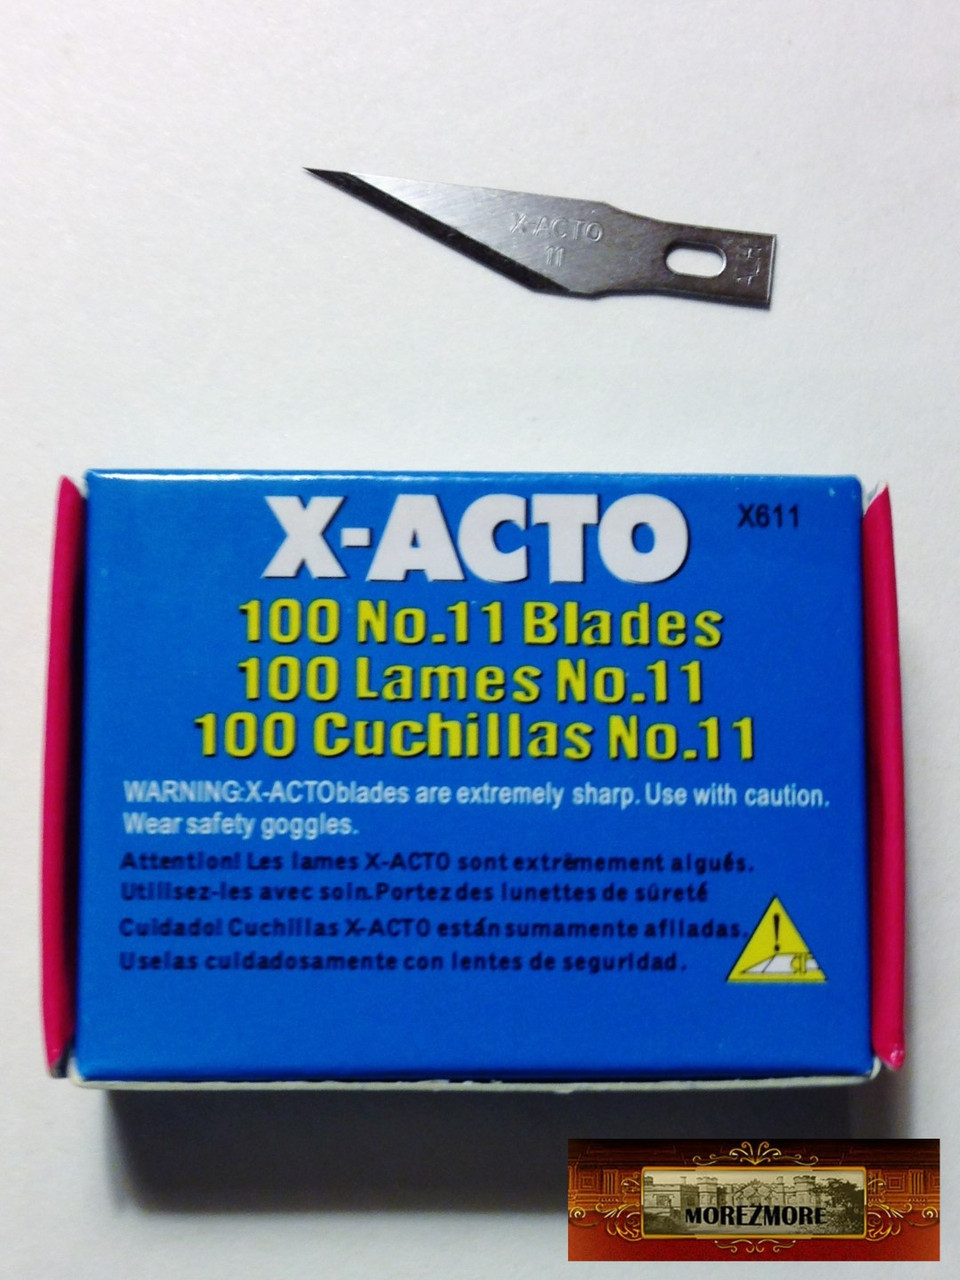 X-Acto Knife Replacement Blades